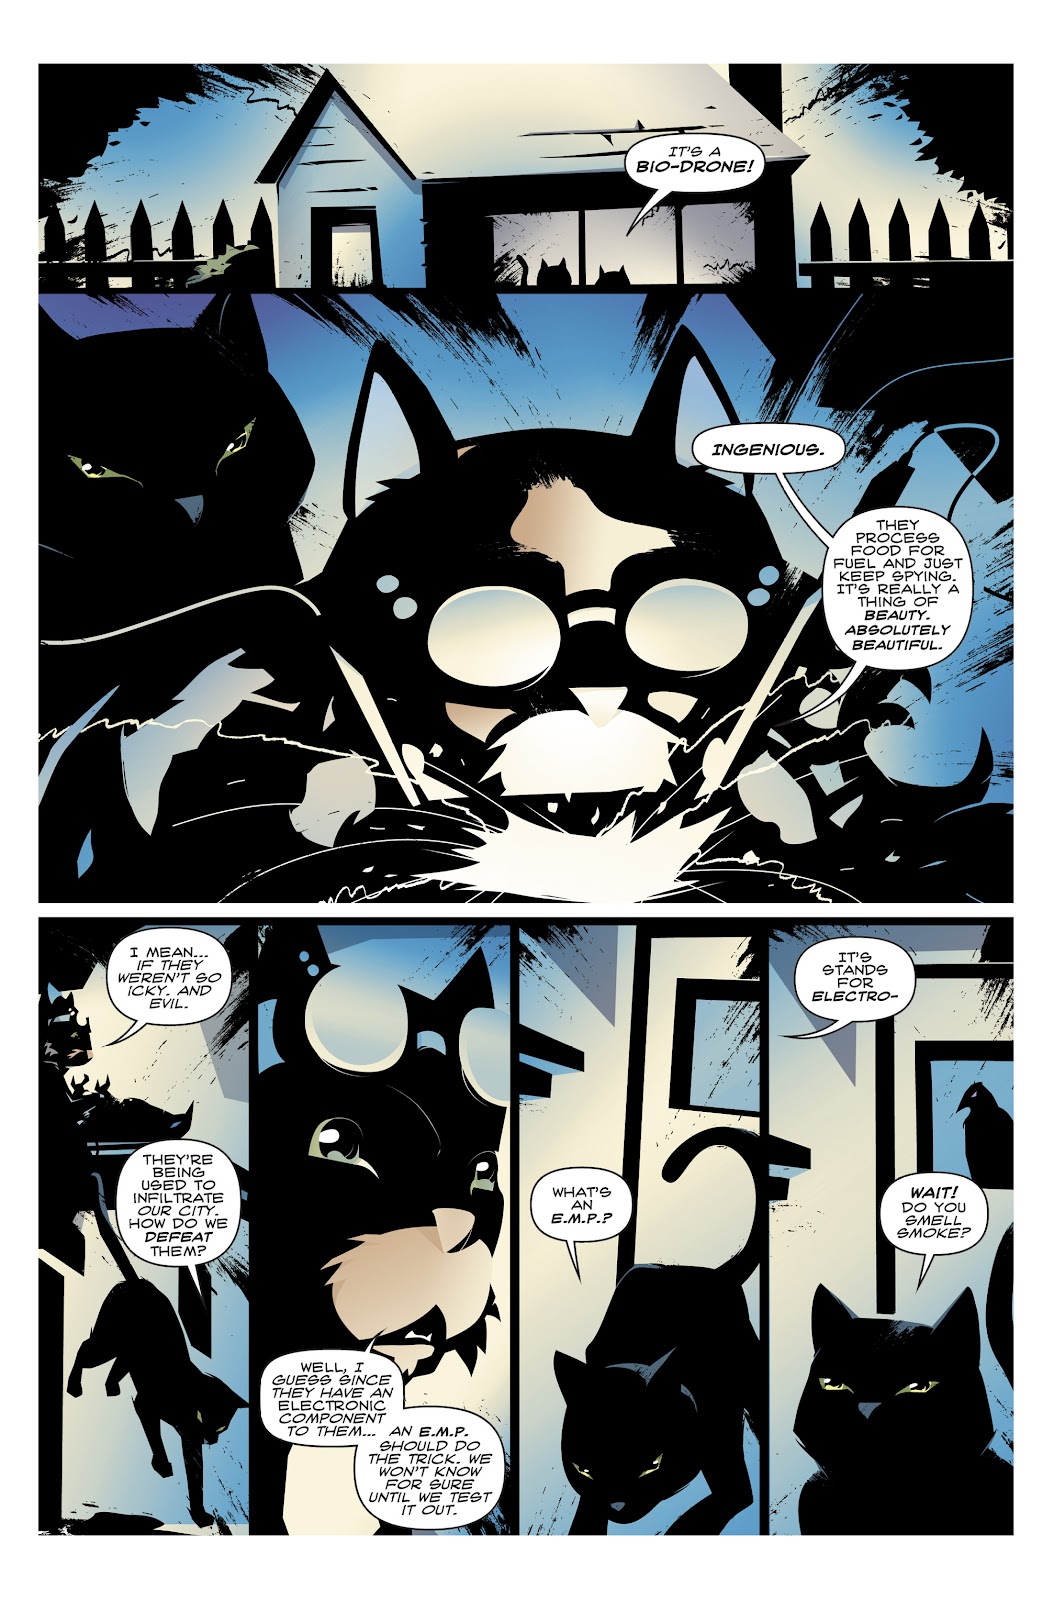 Hero Cats: Midnight Over Stellar City Vol. 2 issue 1 - Page 11